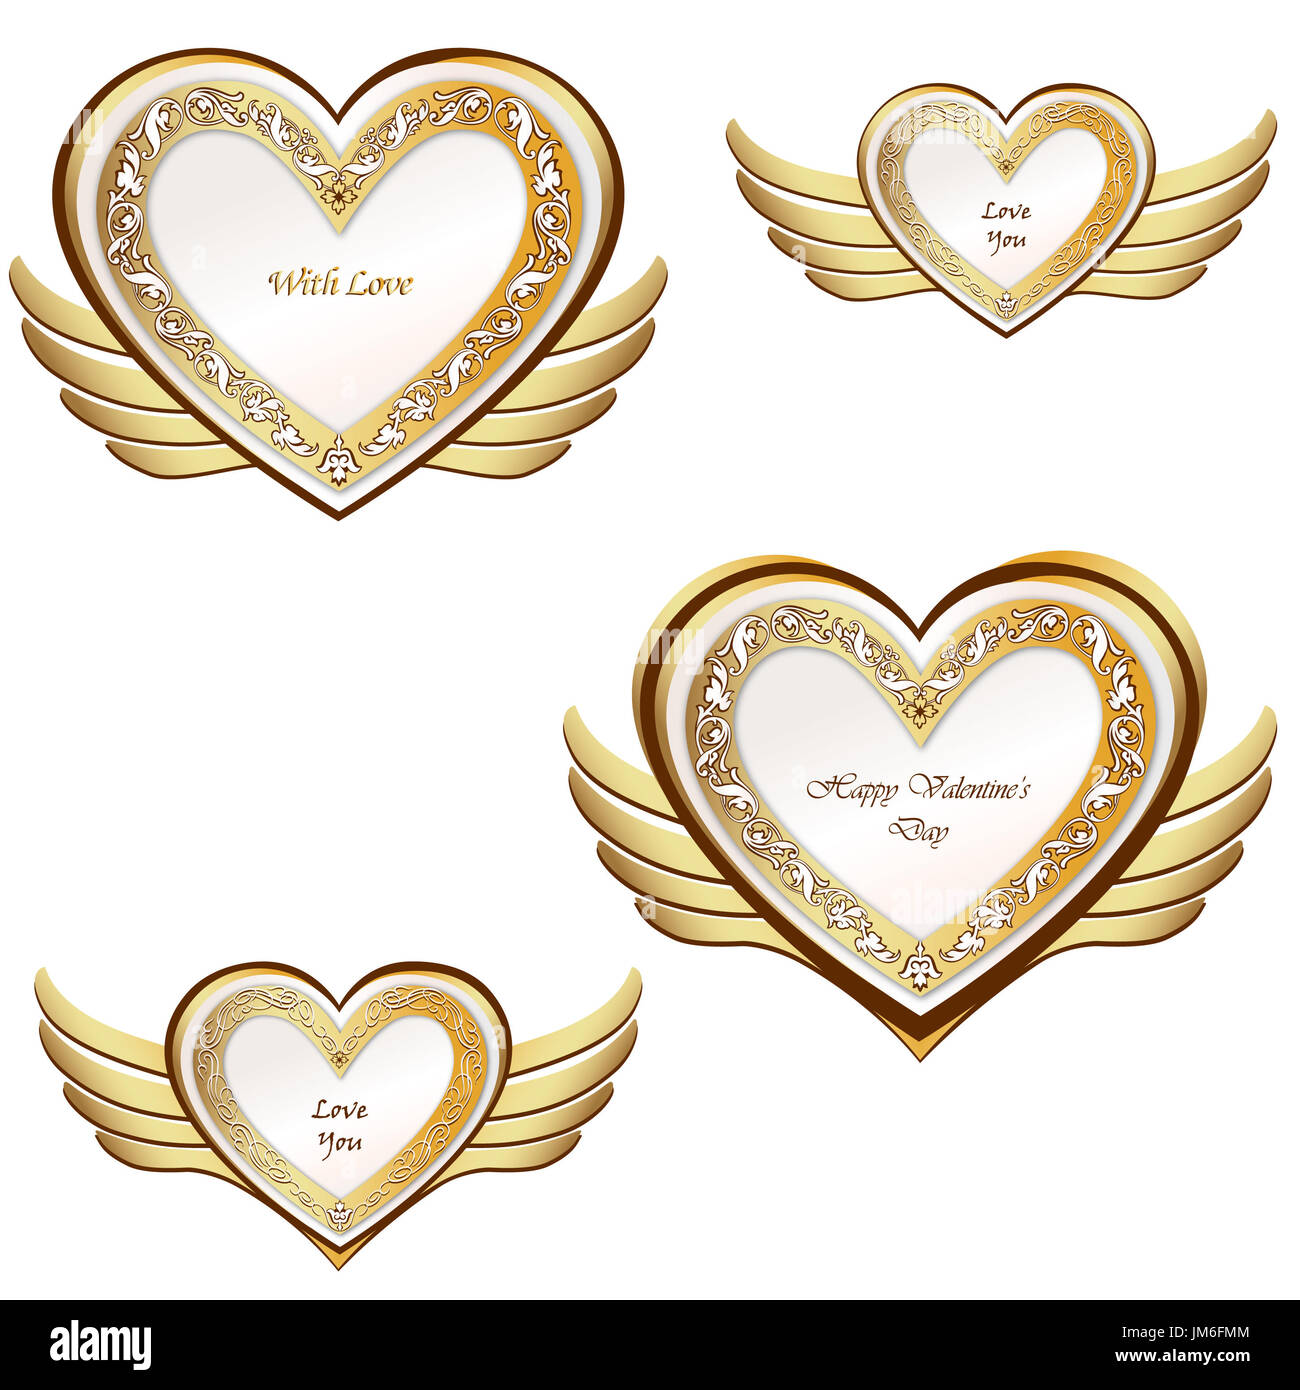 Golden Wing Heart Set Love Hearts Pattern For Valentine S Day Stock Photo Alamy